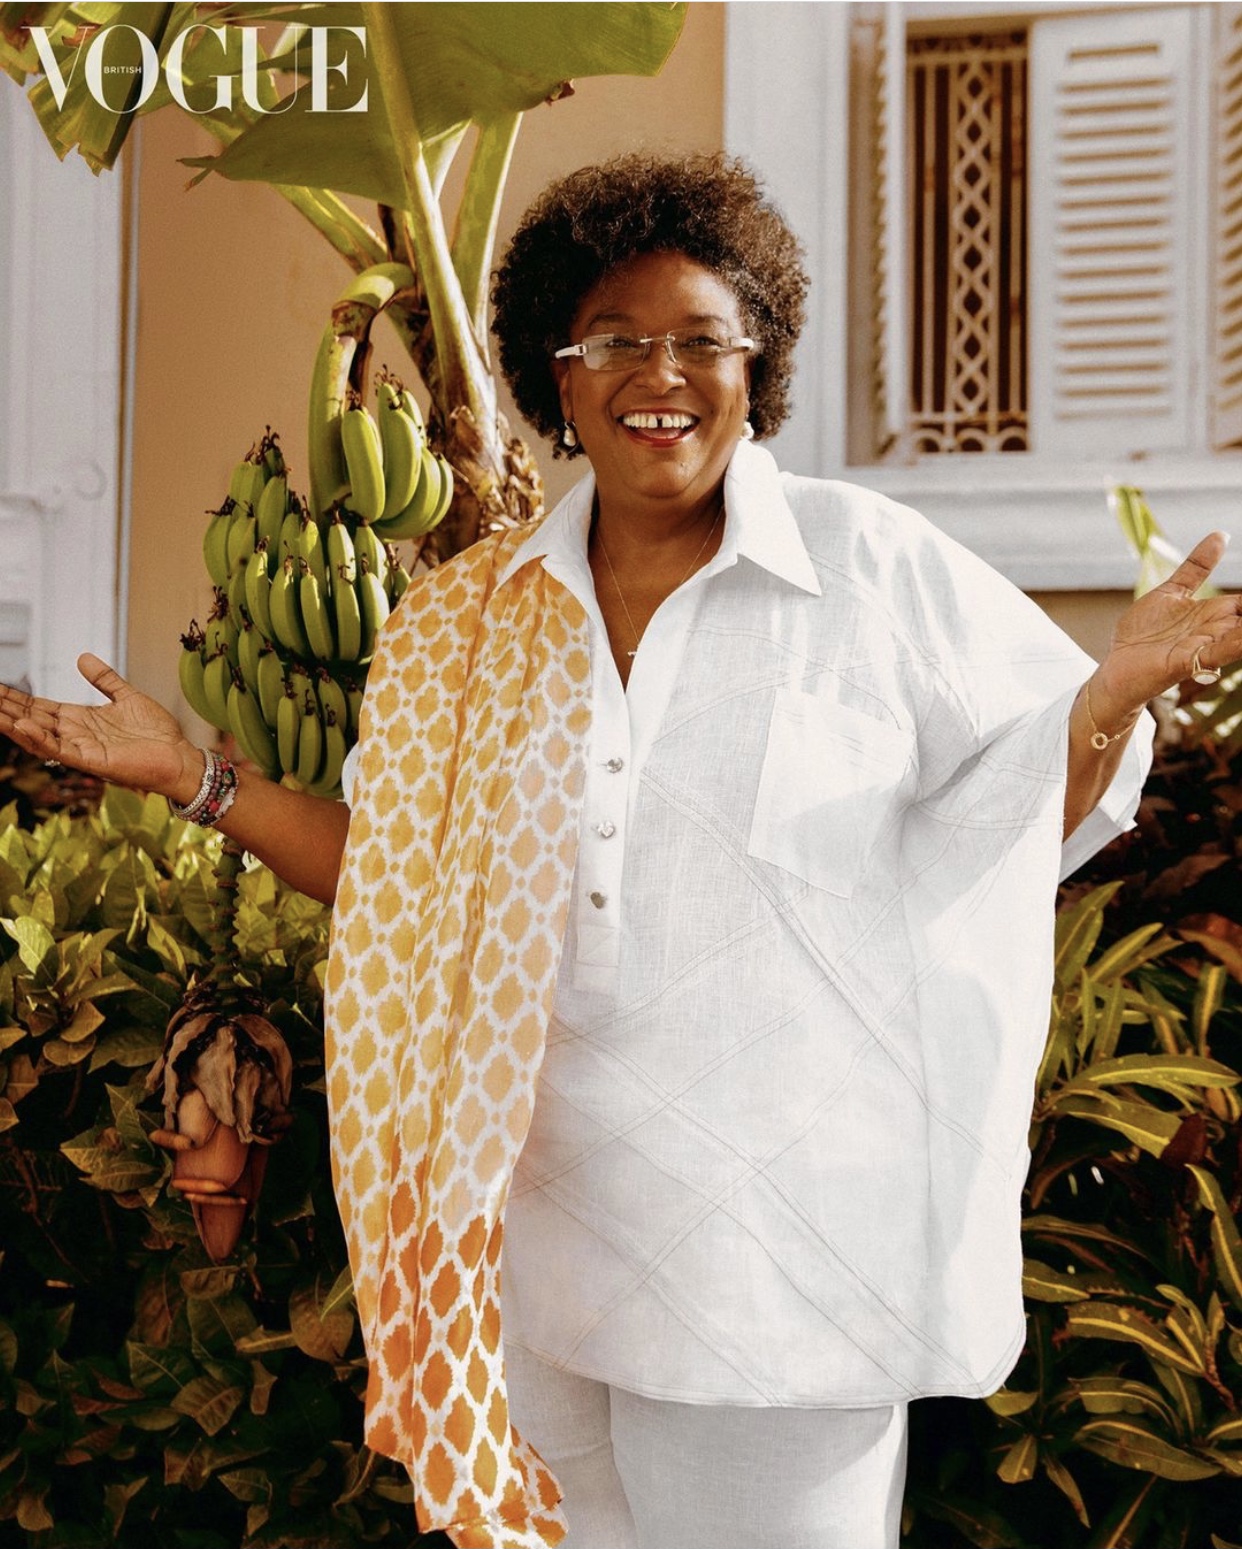 Barbados PM Mia Mottley in British Vogue September issue